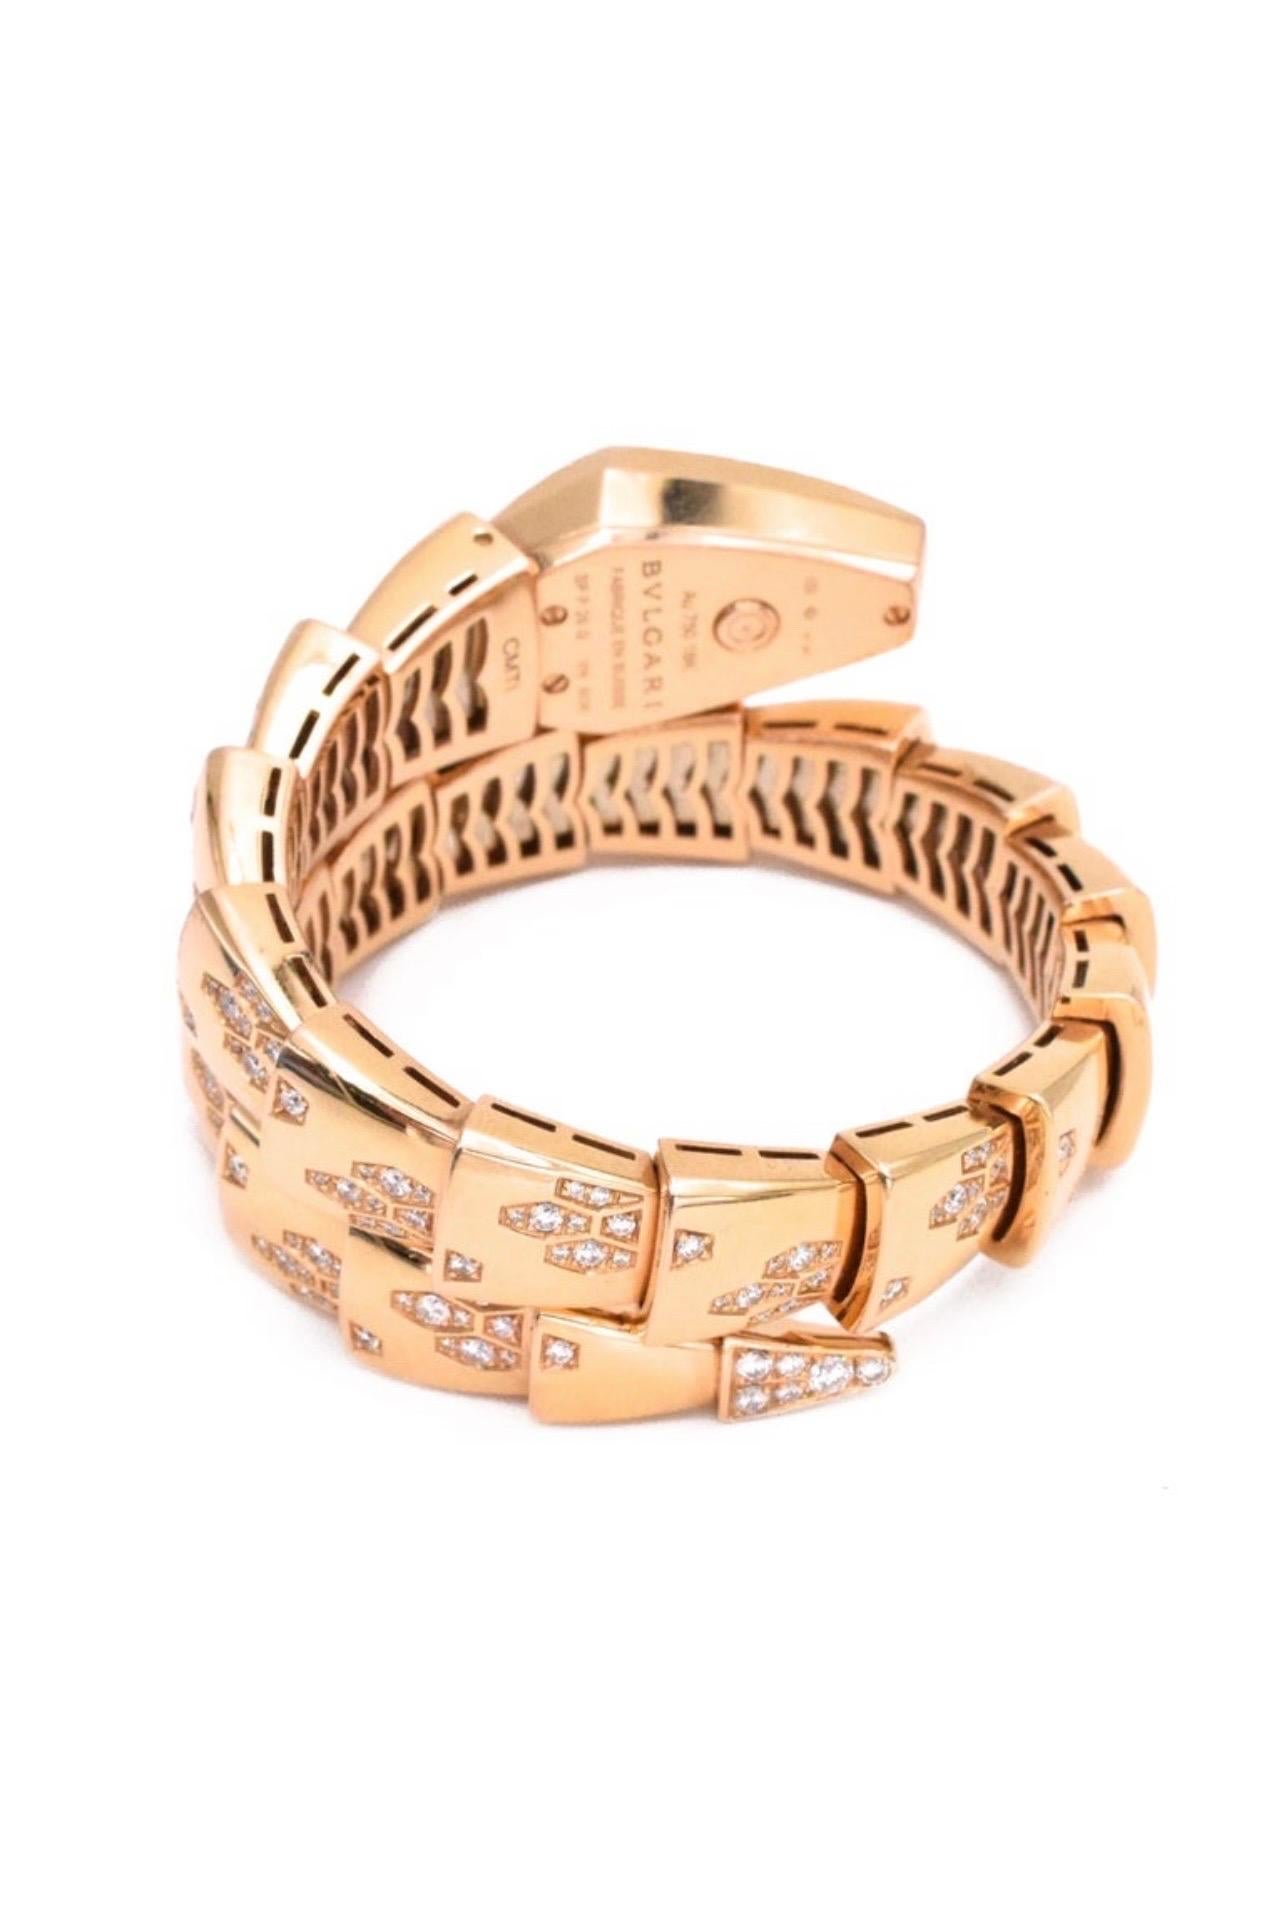 NEW Bvlgari Tubogas Serpenti Scaglie Ladies SPP26WGD1GD11T Watch With Box +paper. Rose gold 90 Gm
Due to Bulgari’s very distinct style, their jewelry is easily recognizable making it very trendy. One of their most recognizable collections is the